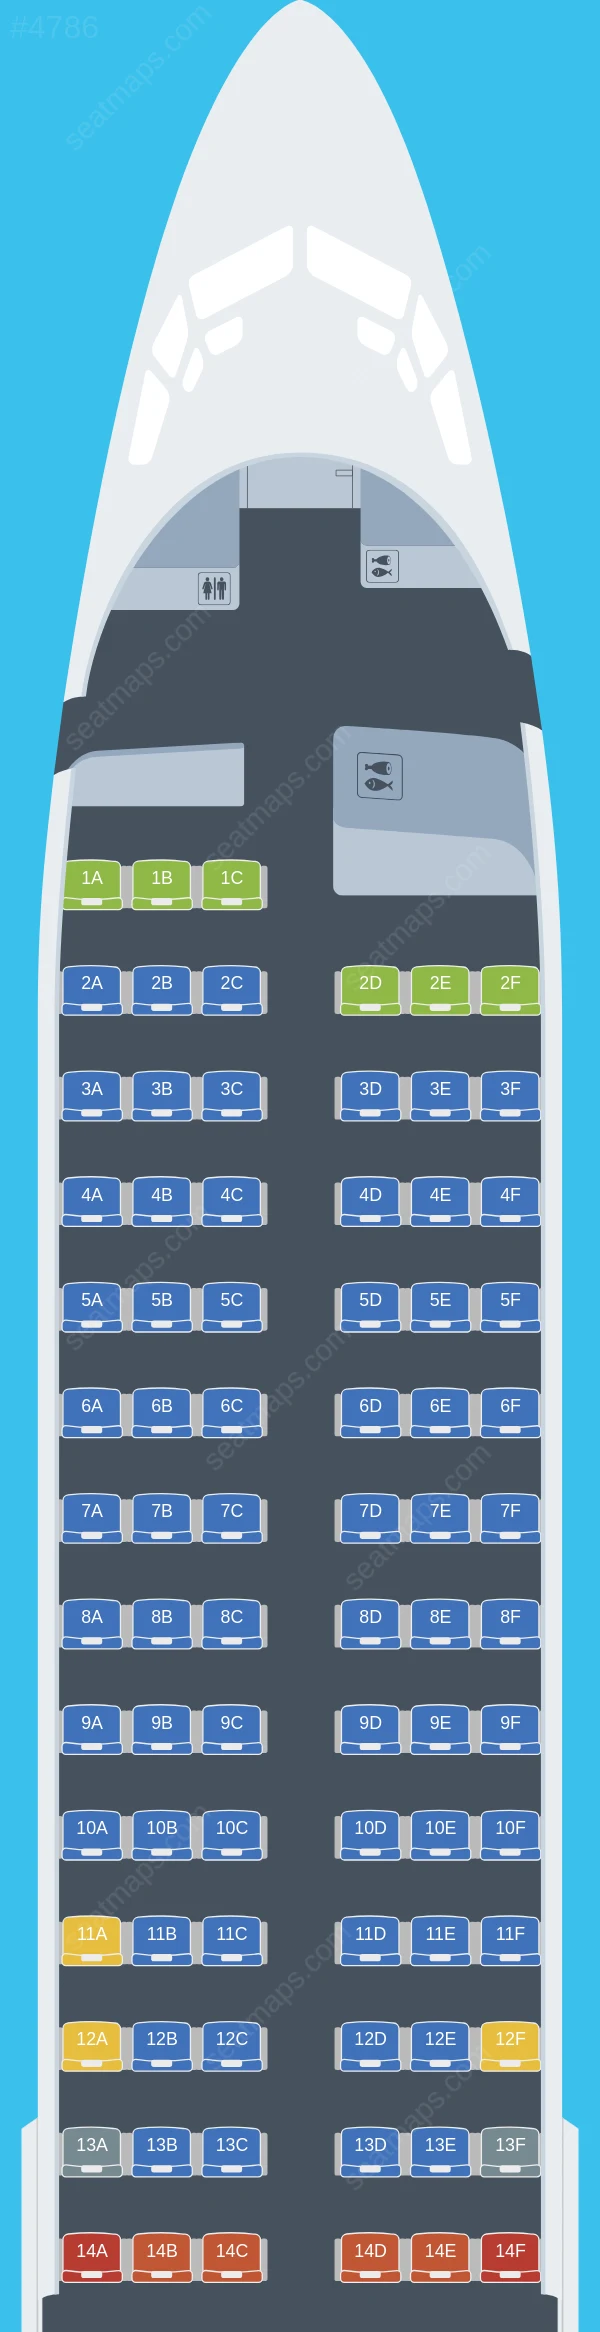 Eastar Jet Boeing 737-800 seatmap preview